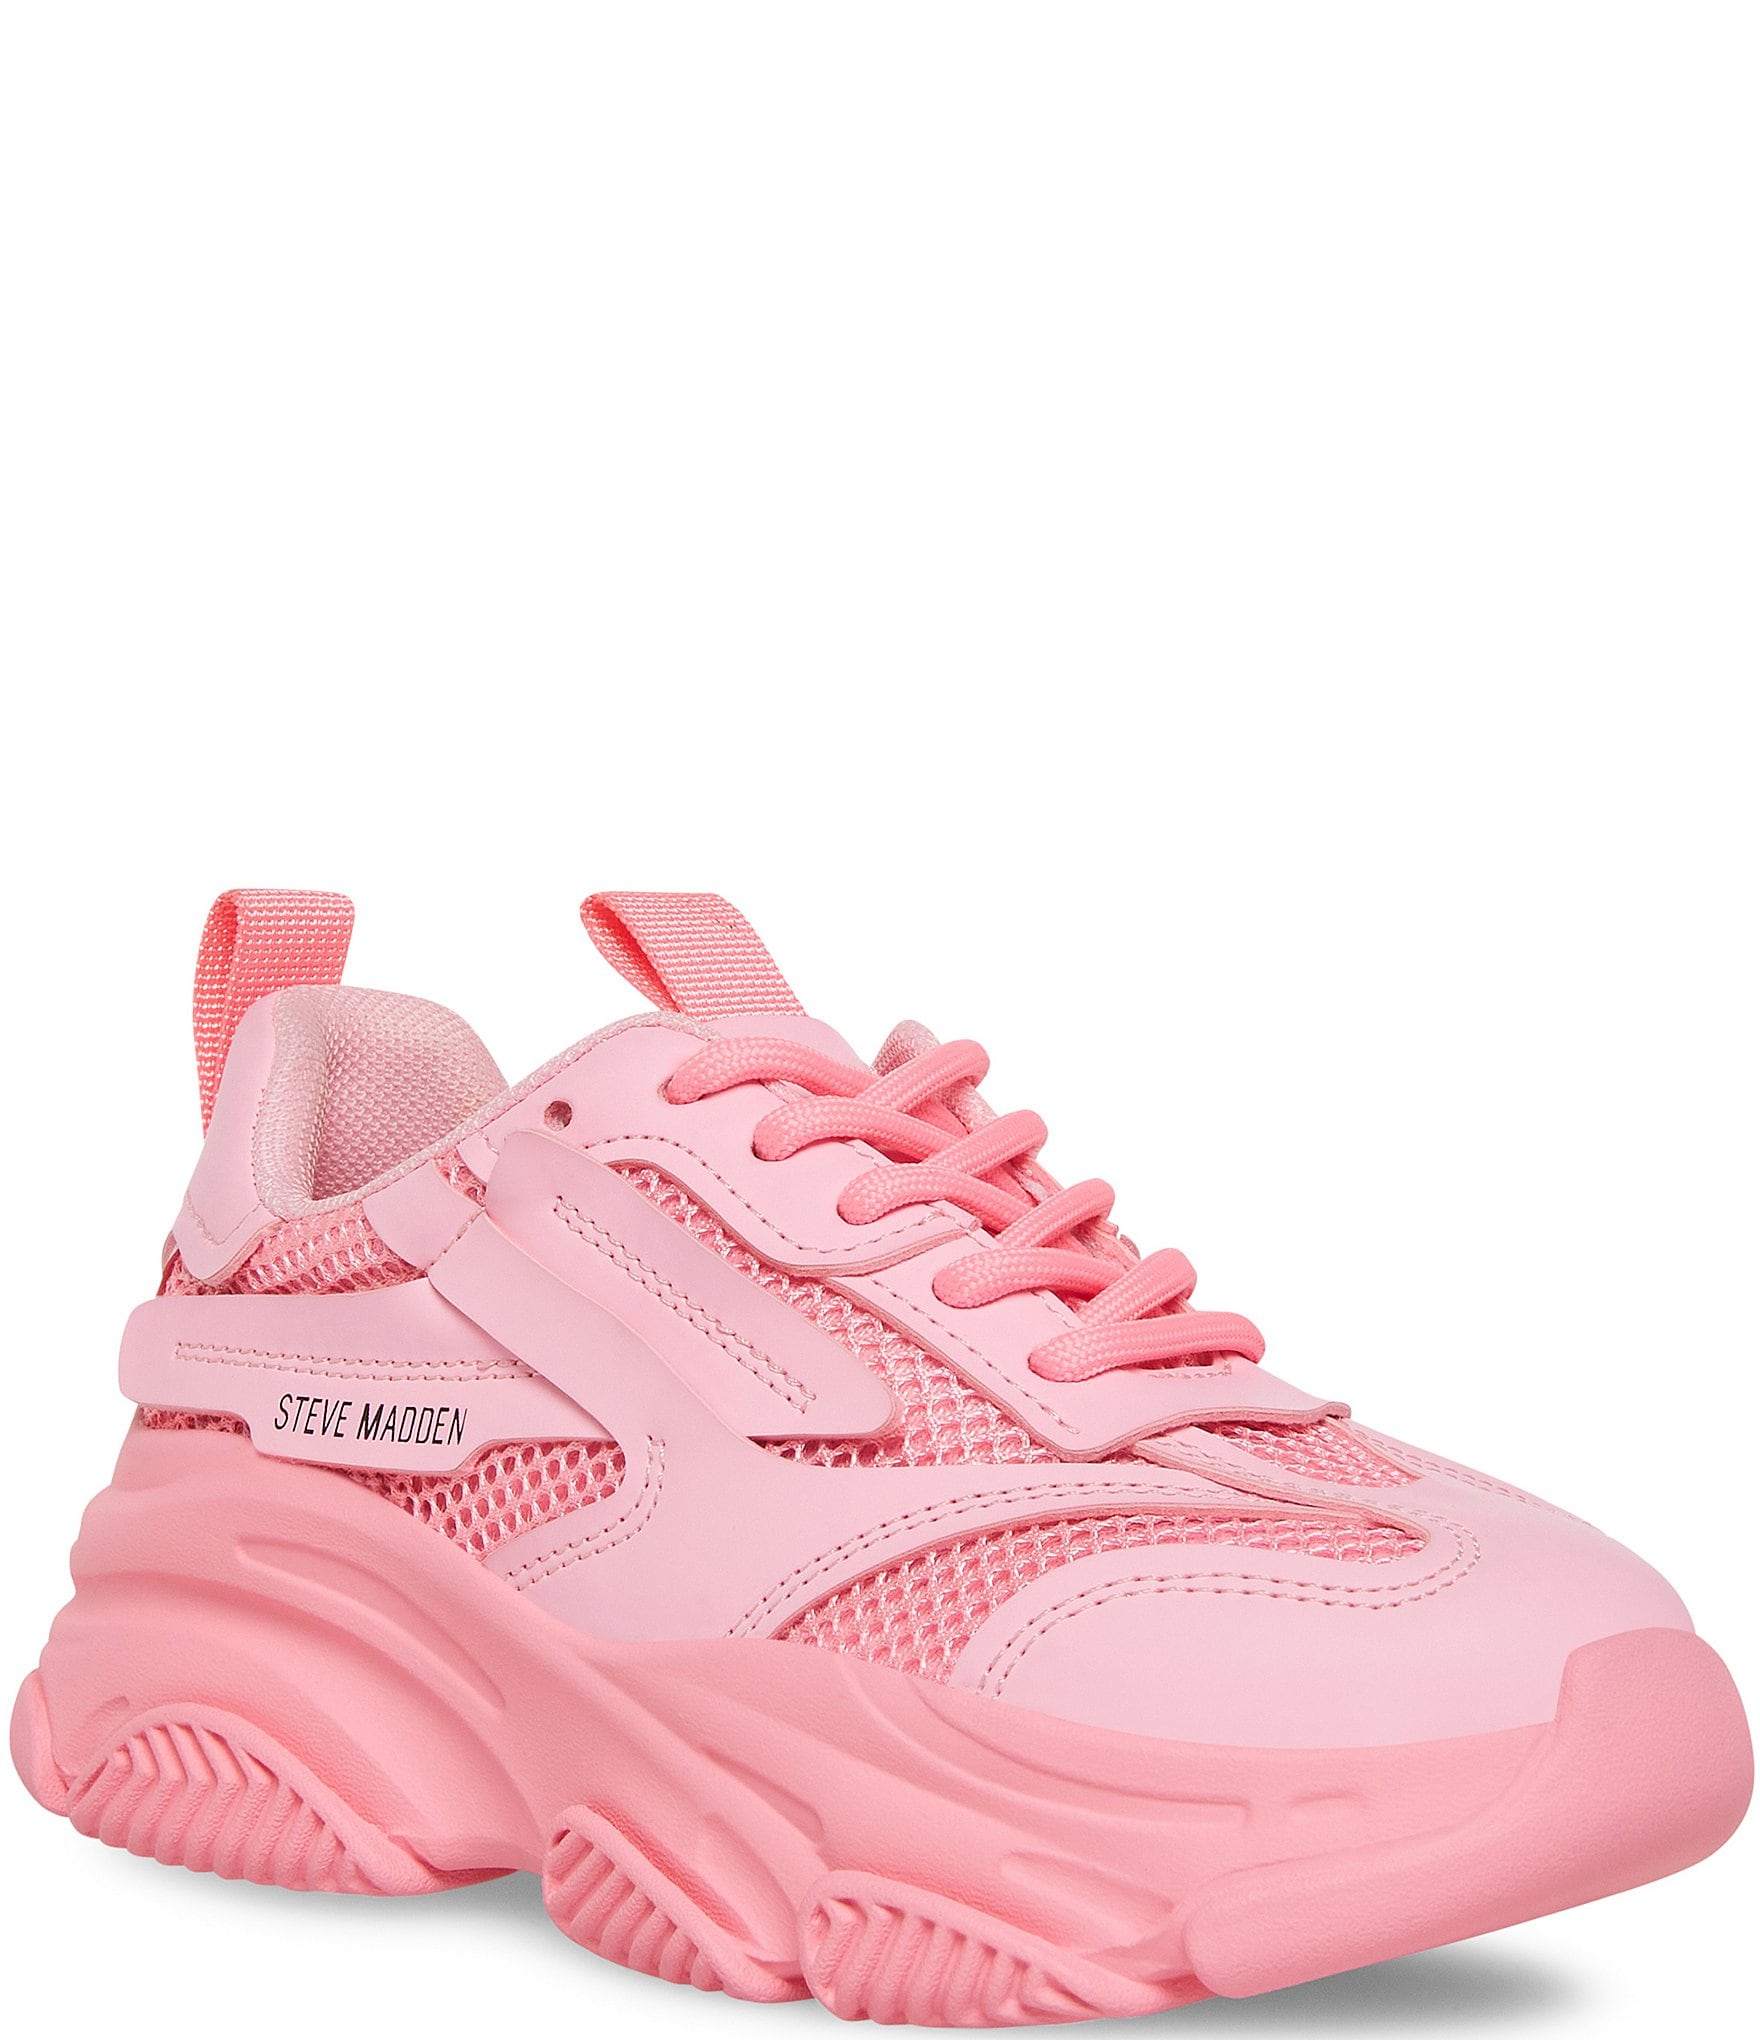 Steve Madden Girls' J-Possession Lace-Up Sneakers |